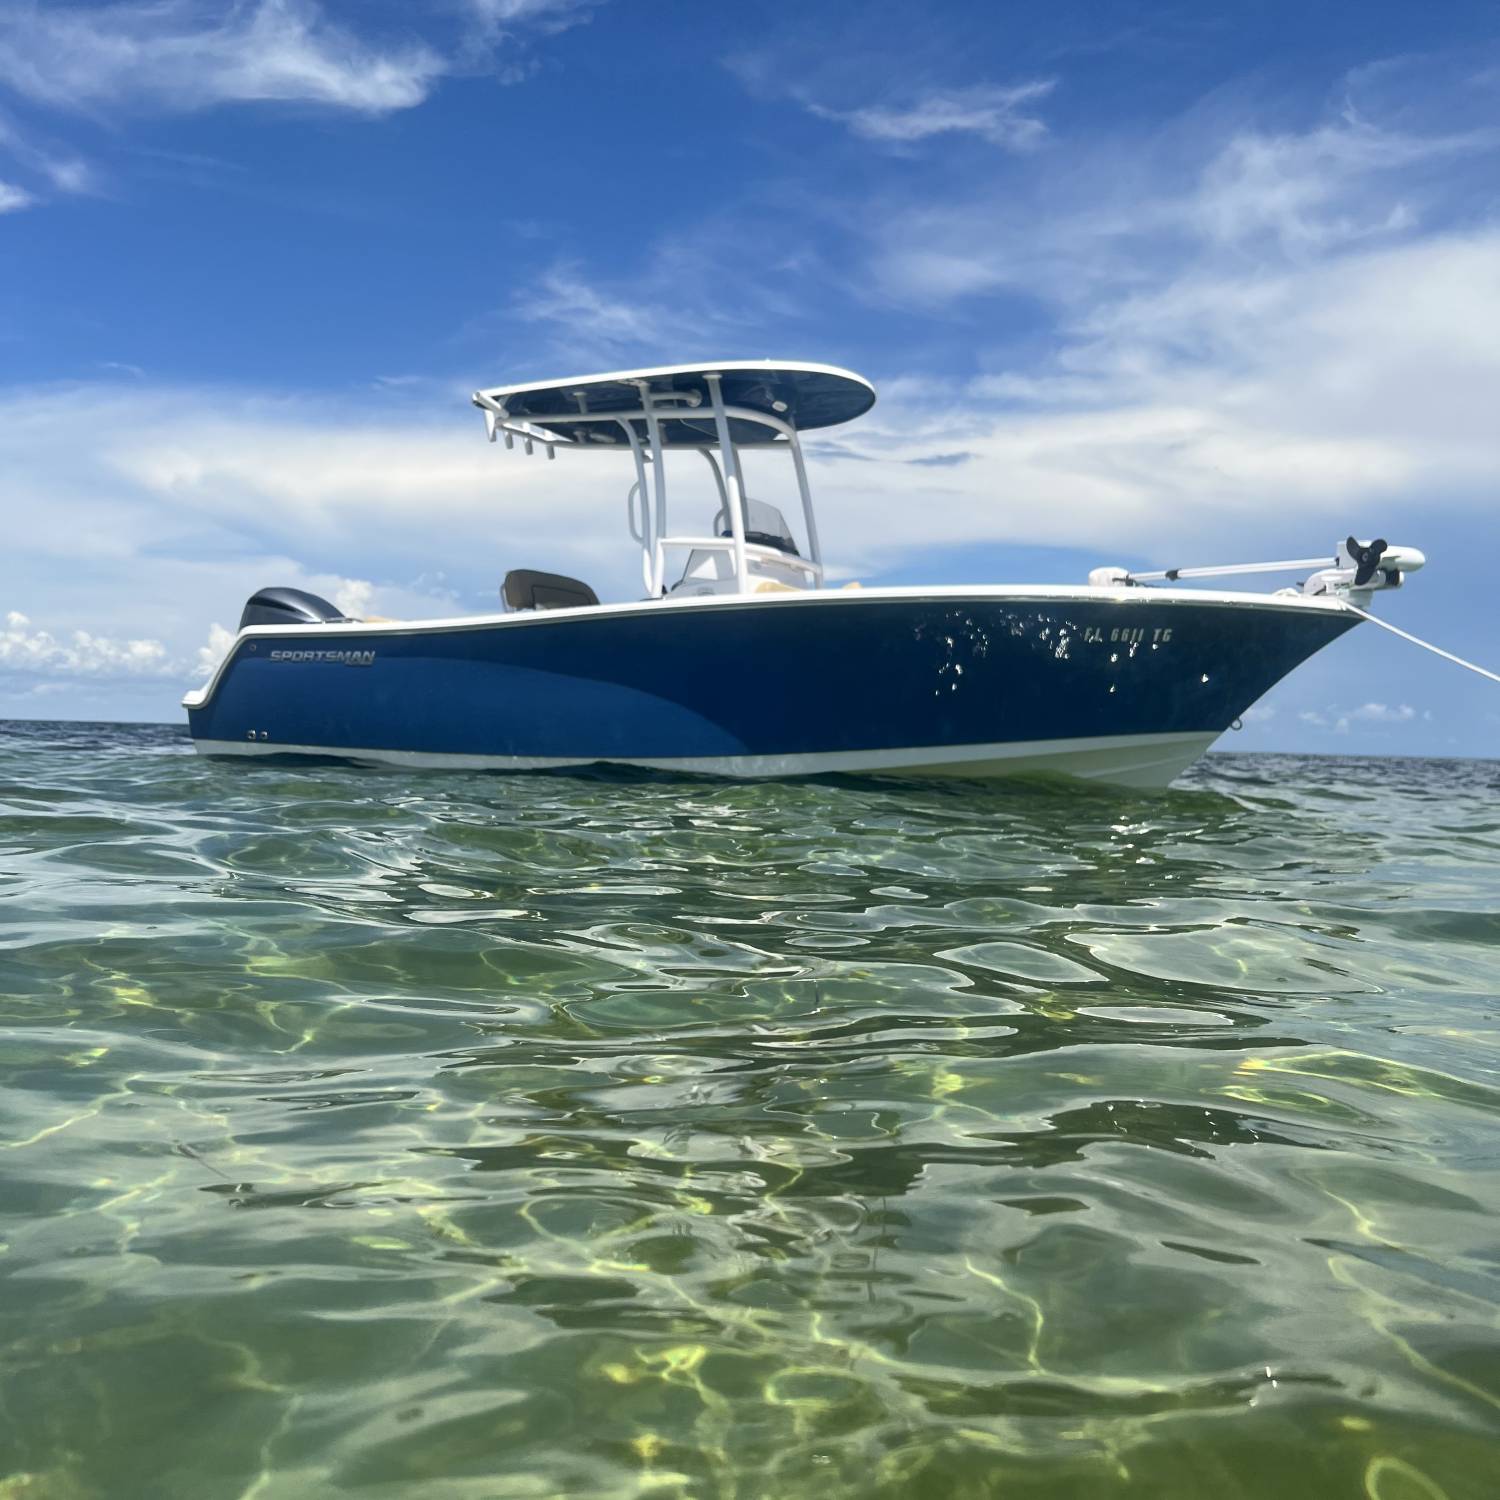 Title: At the sand bar - On board their Sportsman Open 232 Center Console - Location: Ochloknee shoals sandbar. Participating in the Photo Contest #SportsmanOctober